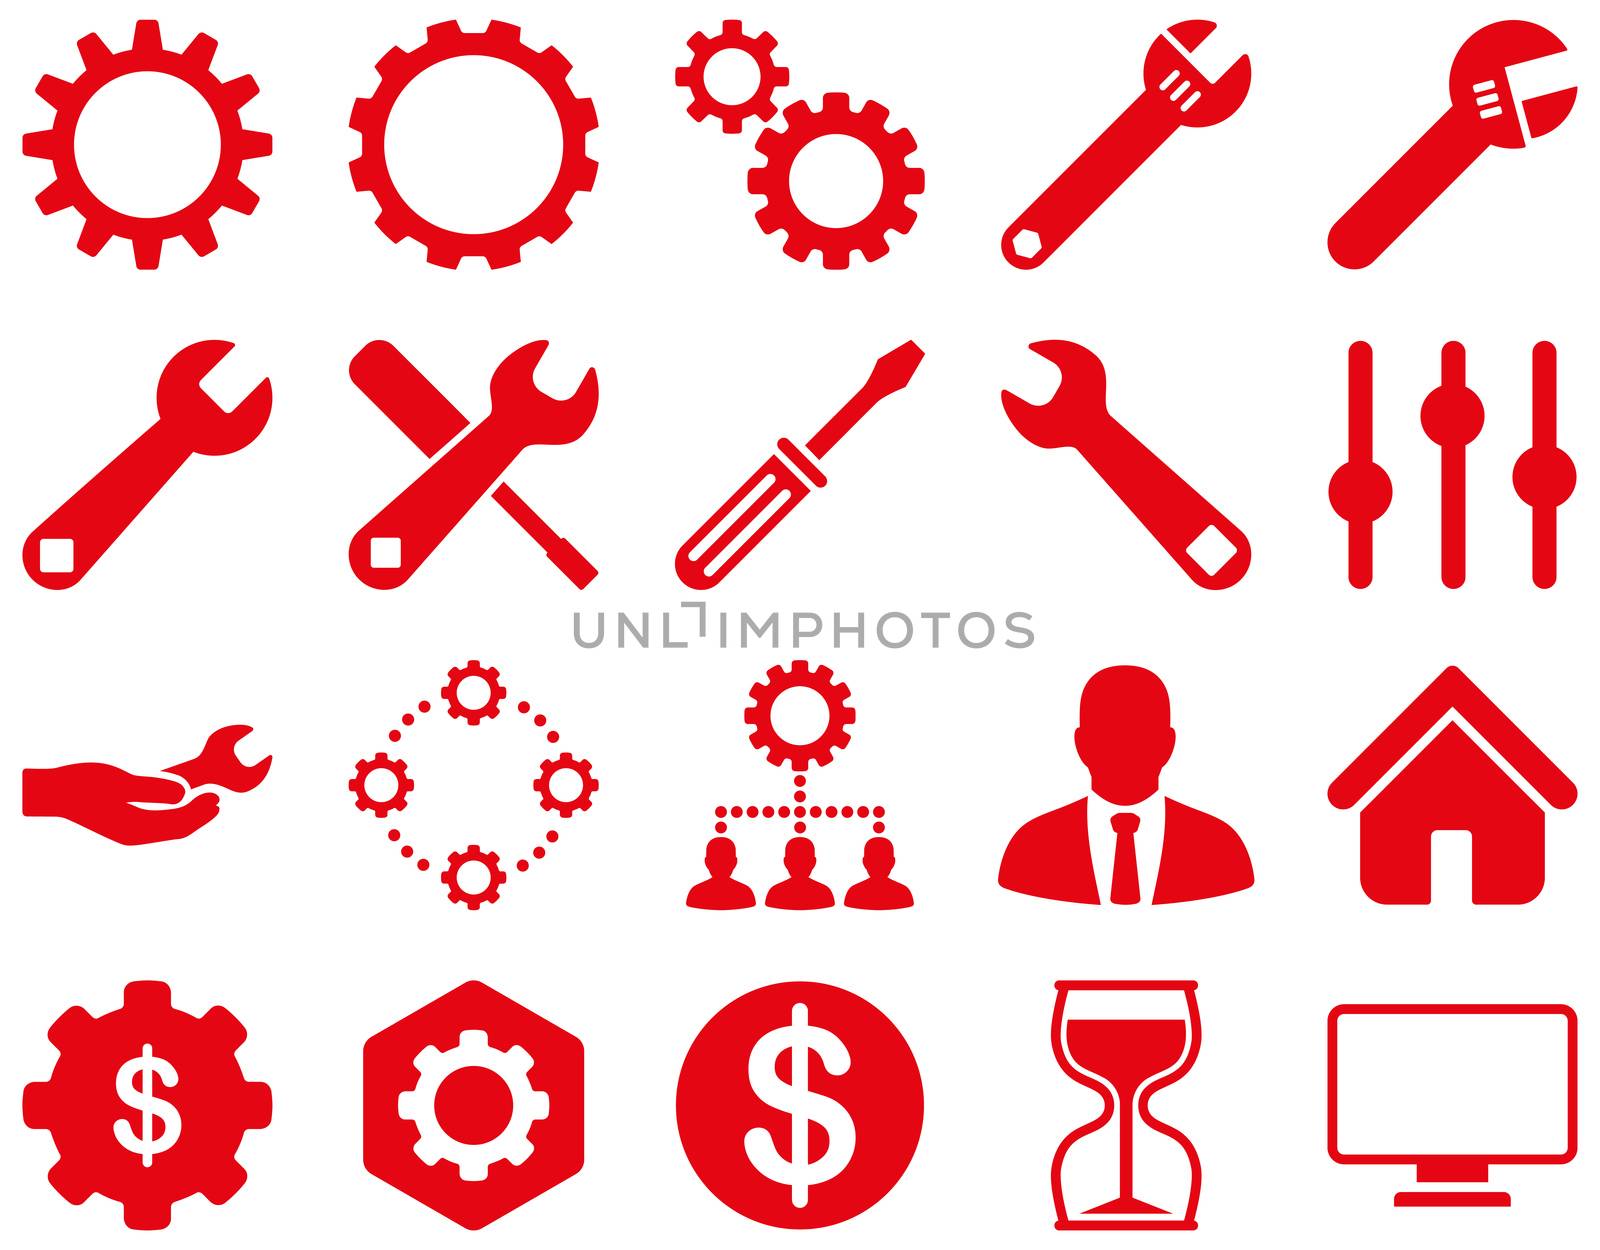 Settings and Tools Icons. Glyph set style is flat images, red color, isolated on a white background.